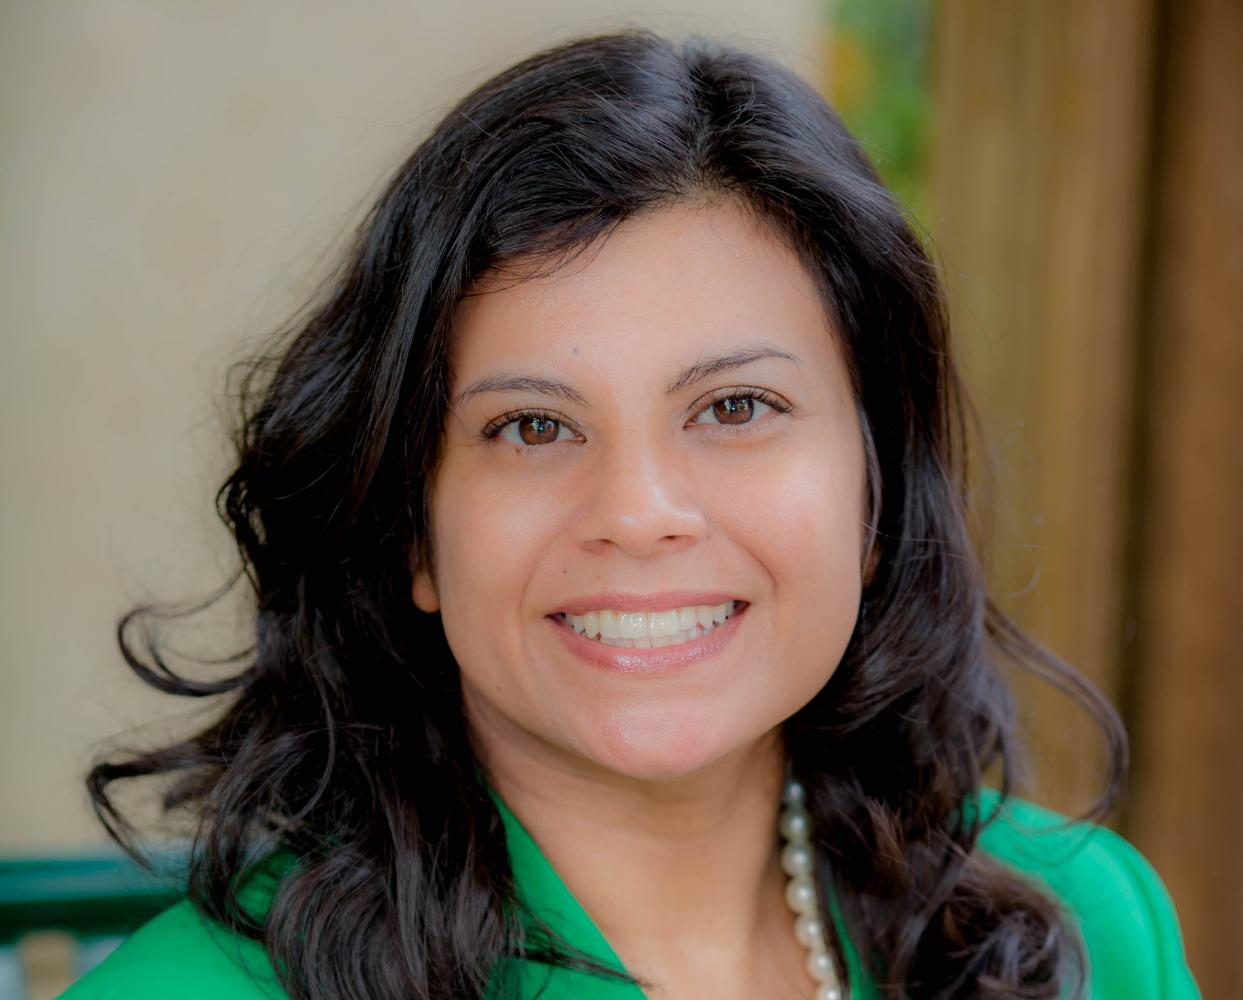 Viridiana Diaz began her term as national president of CAMP and HEP programs in July. She was elected into office two years prior to prepare to start the position.